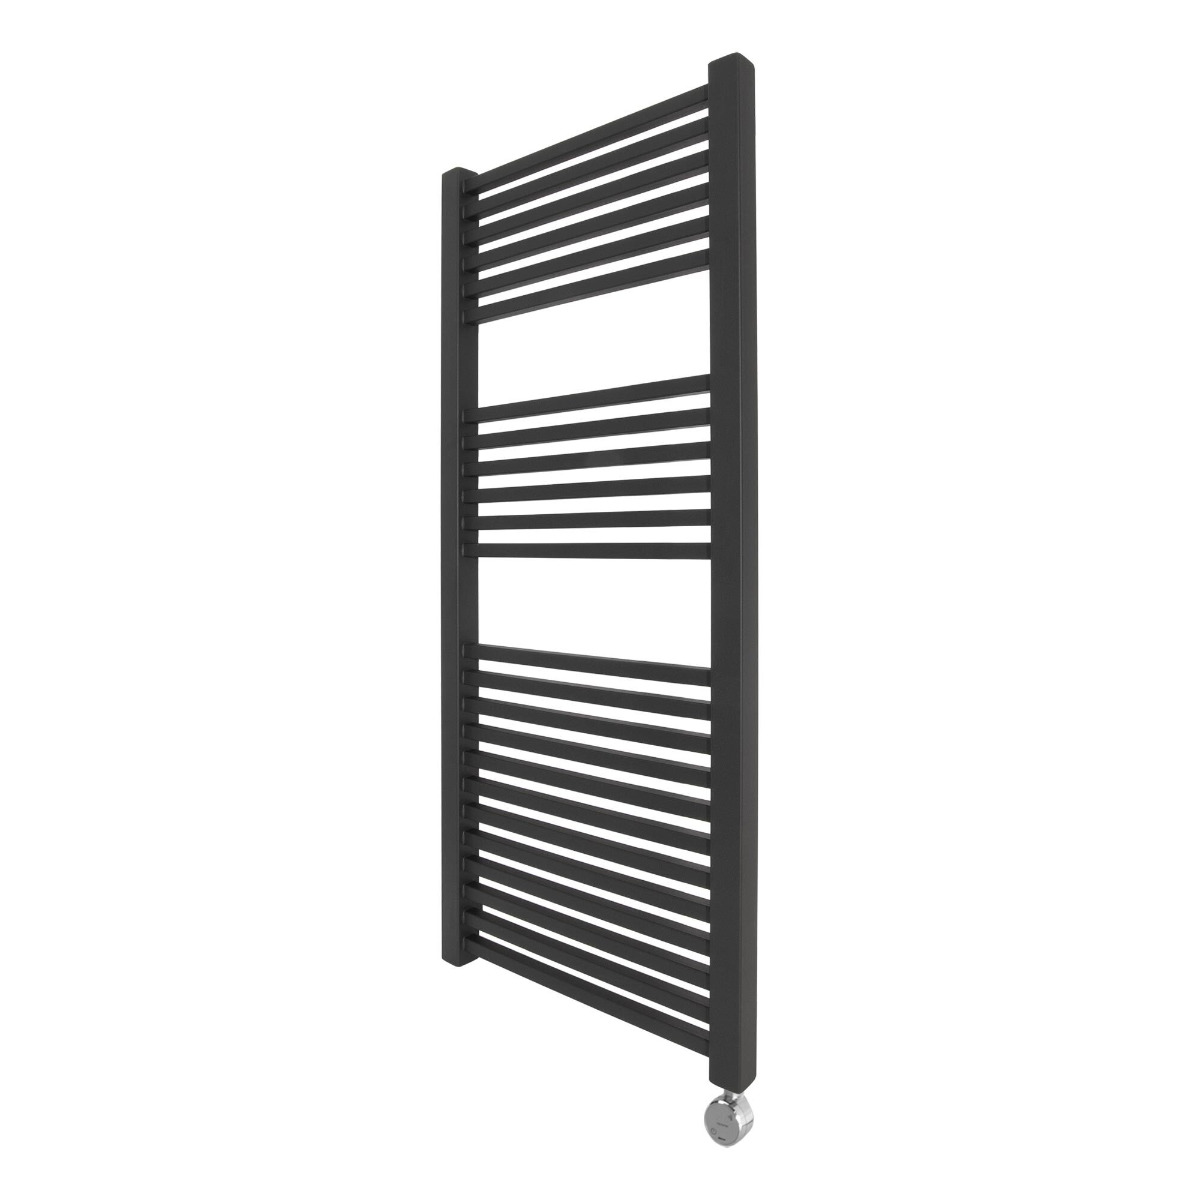 Ecostrad Cube Bluetooth Electric Towel Rail - Anthracite 600w (500 x 1200mm)